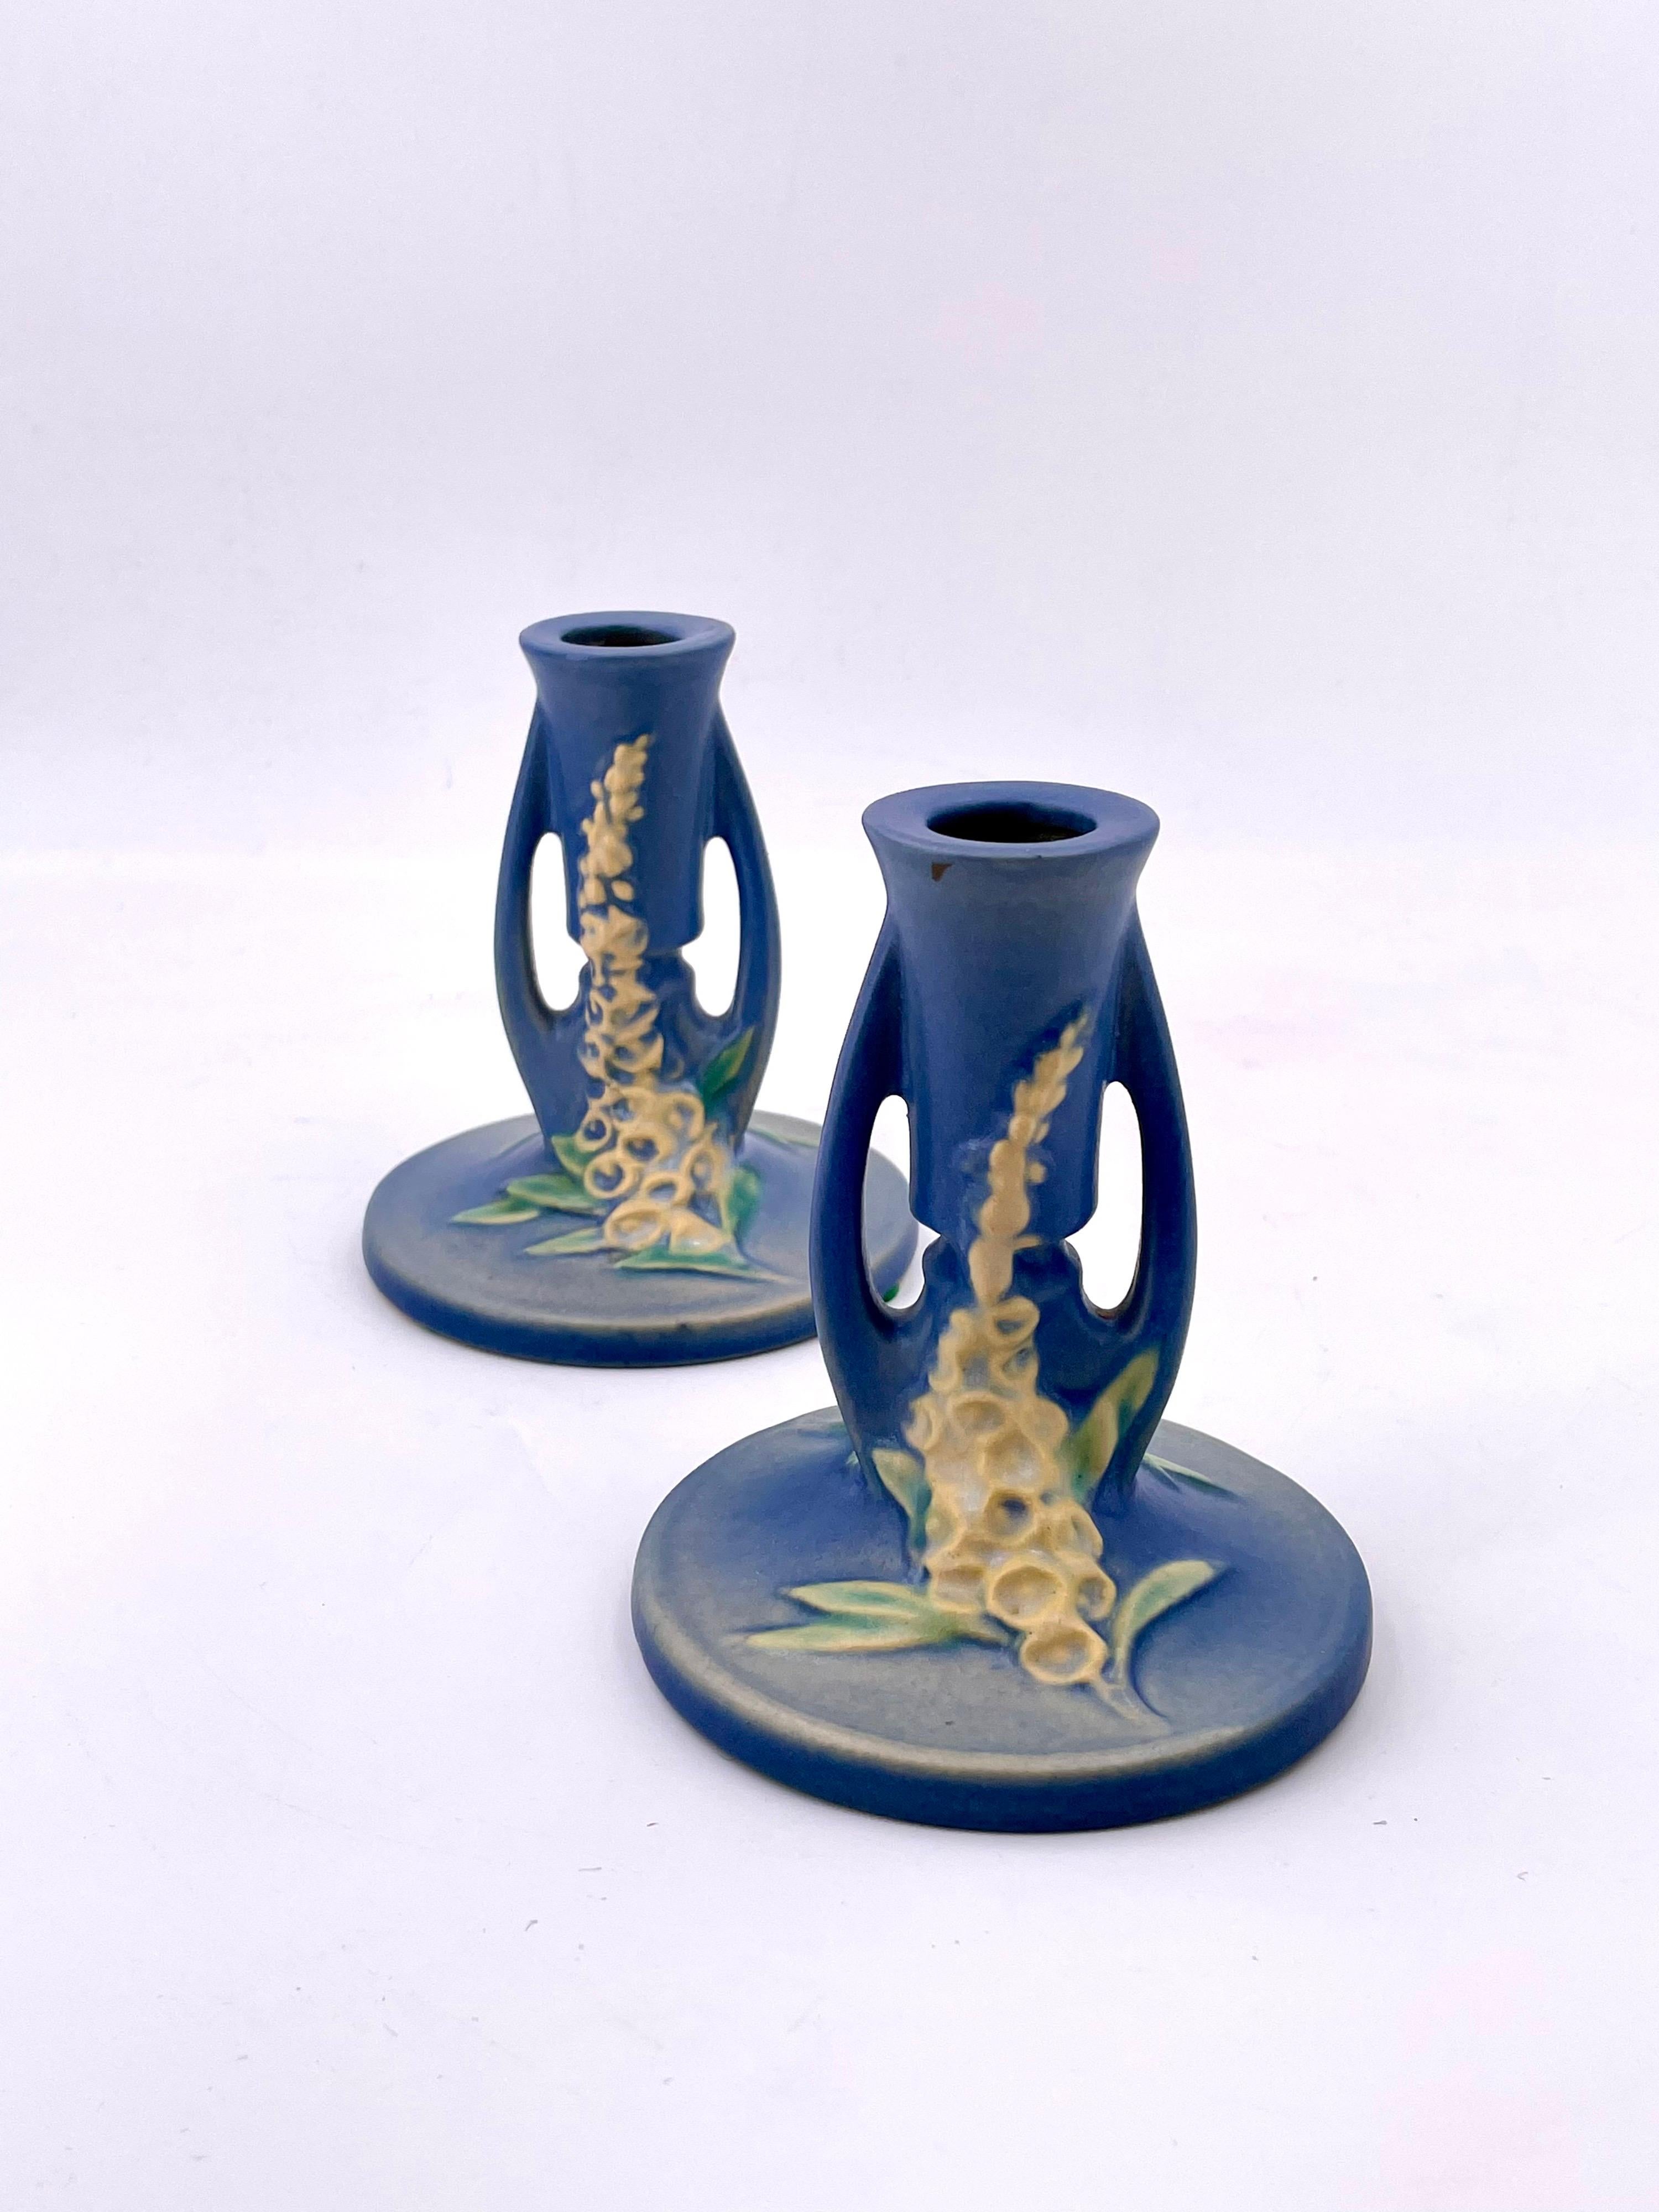 Roseville model 1150 pair of candlestick holders in beautiful blue glaze flower decorations, and side handles.